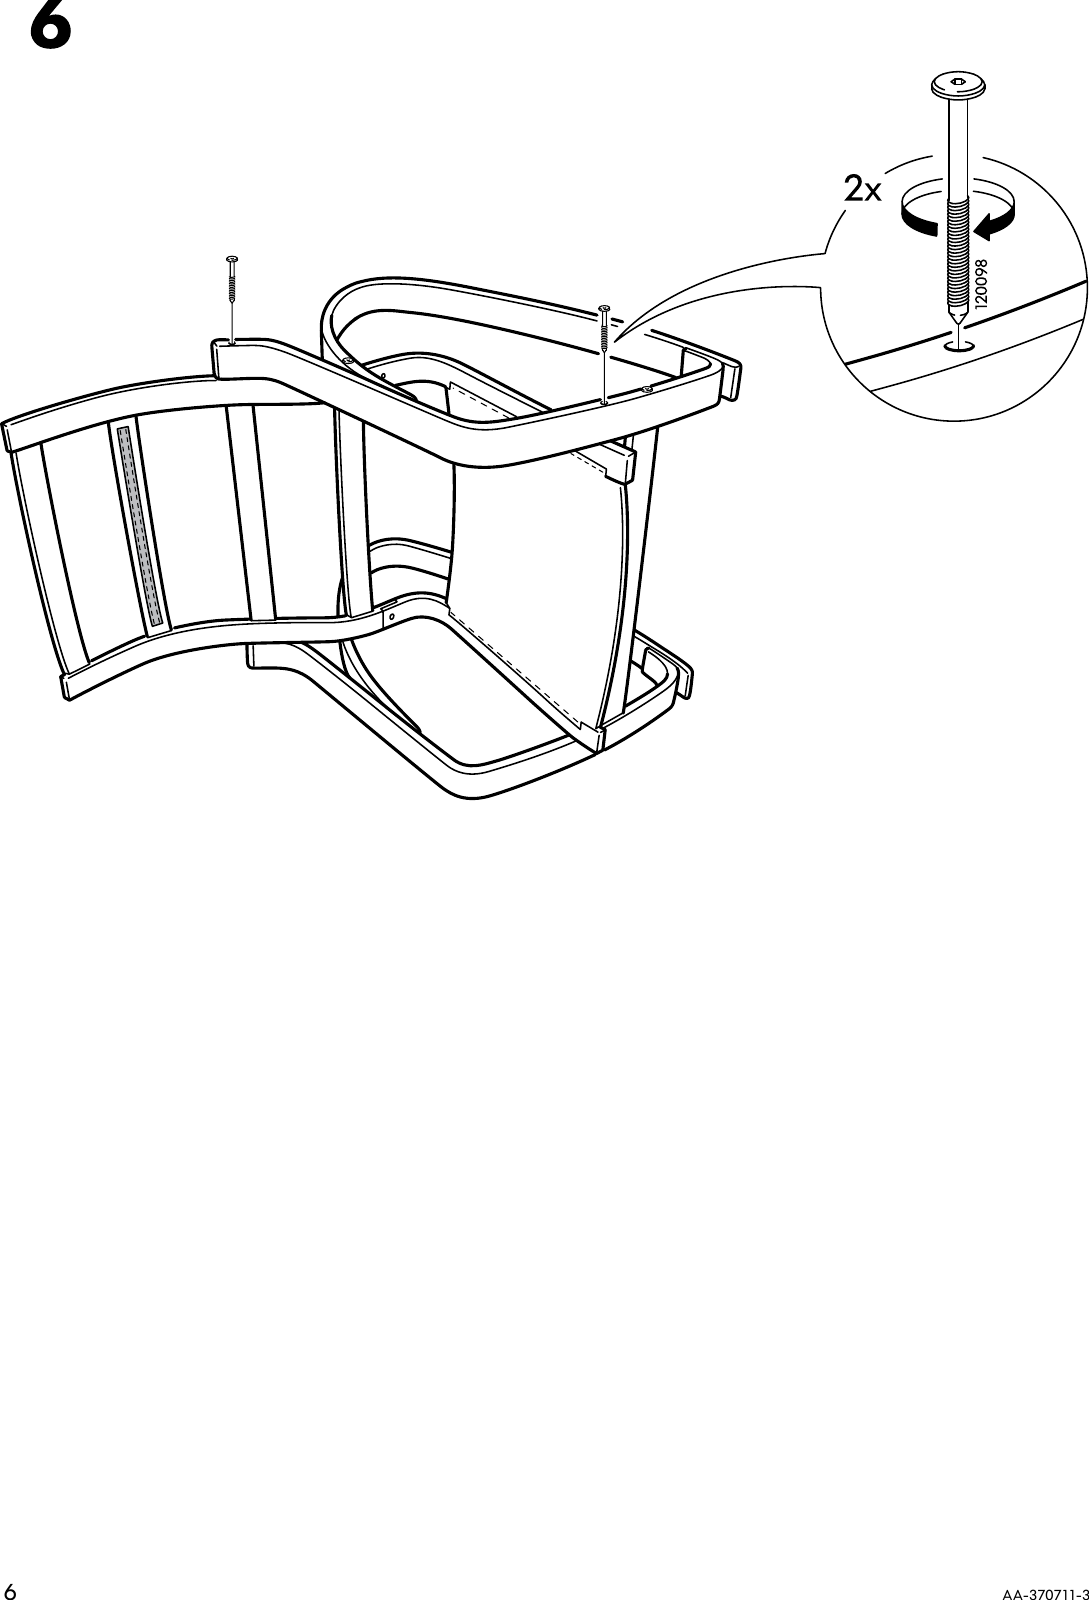 Page 6 of 8 - Ikea Ikea-Poang-Rocking-Chair-Frame-Assembly-Instruction